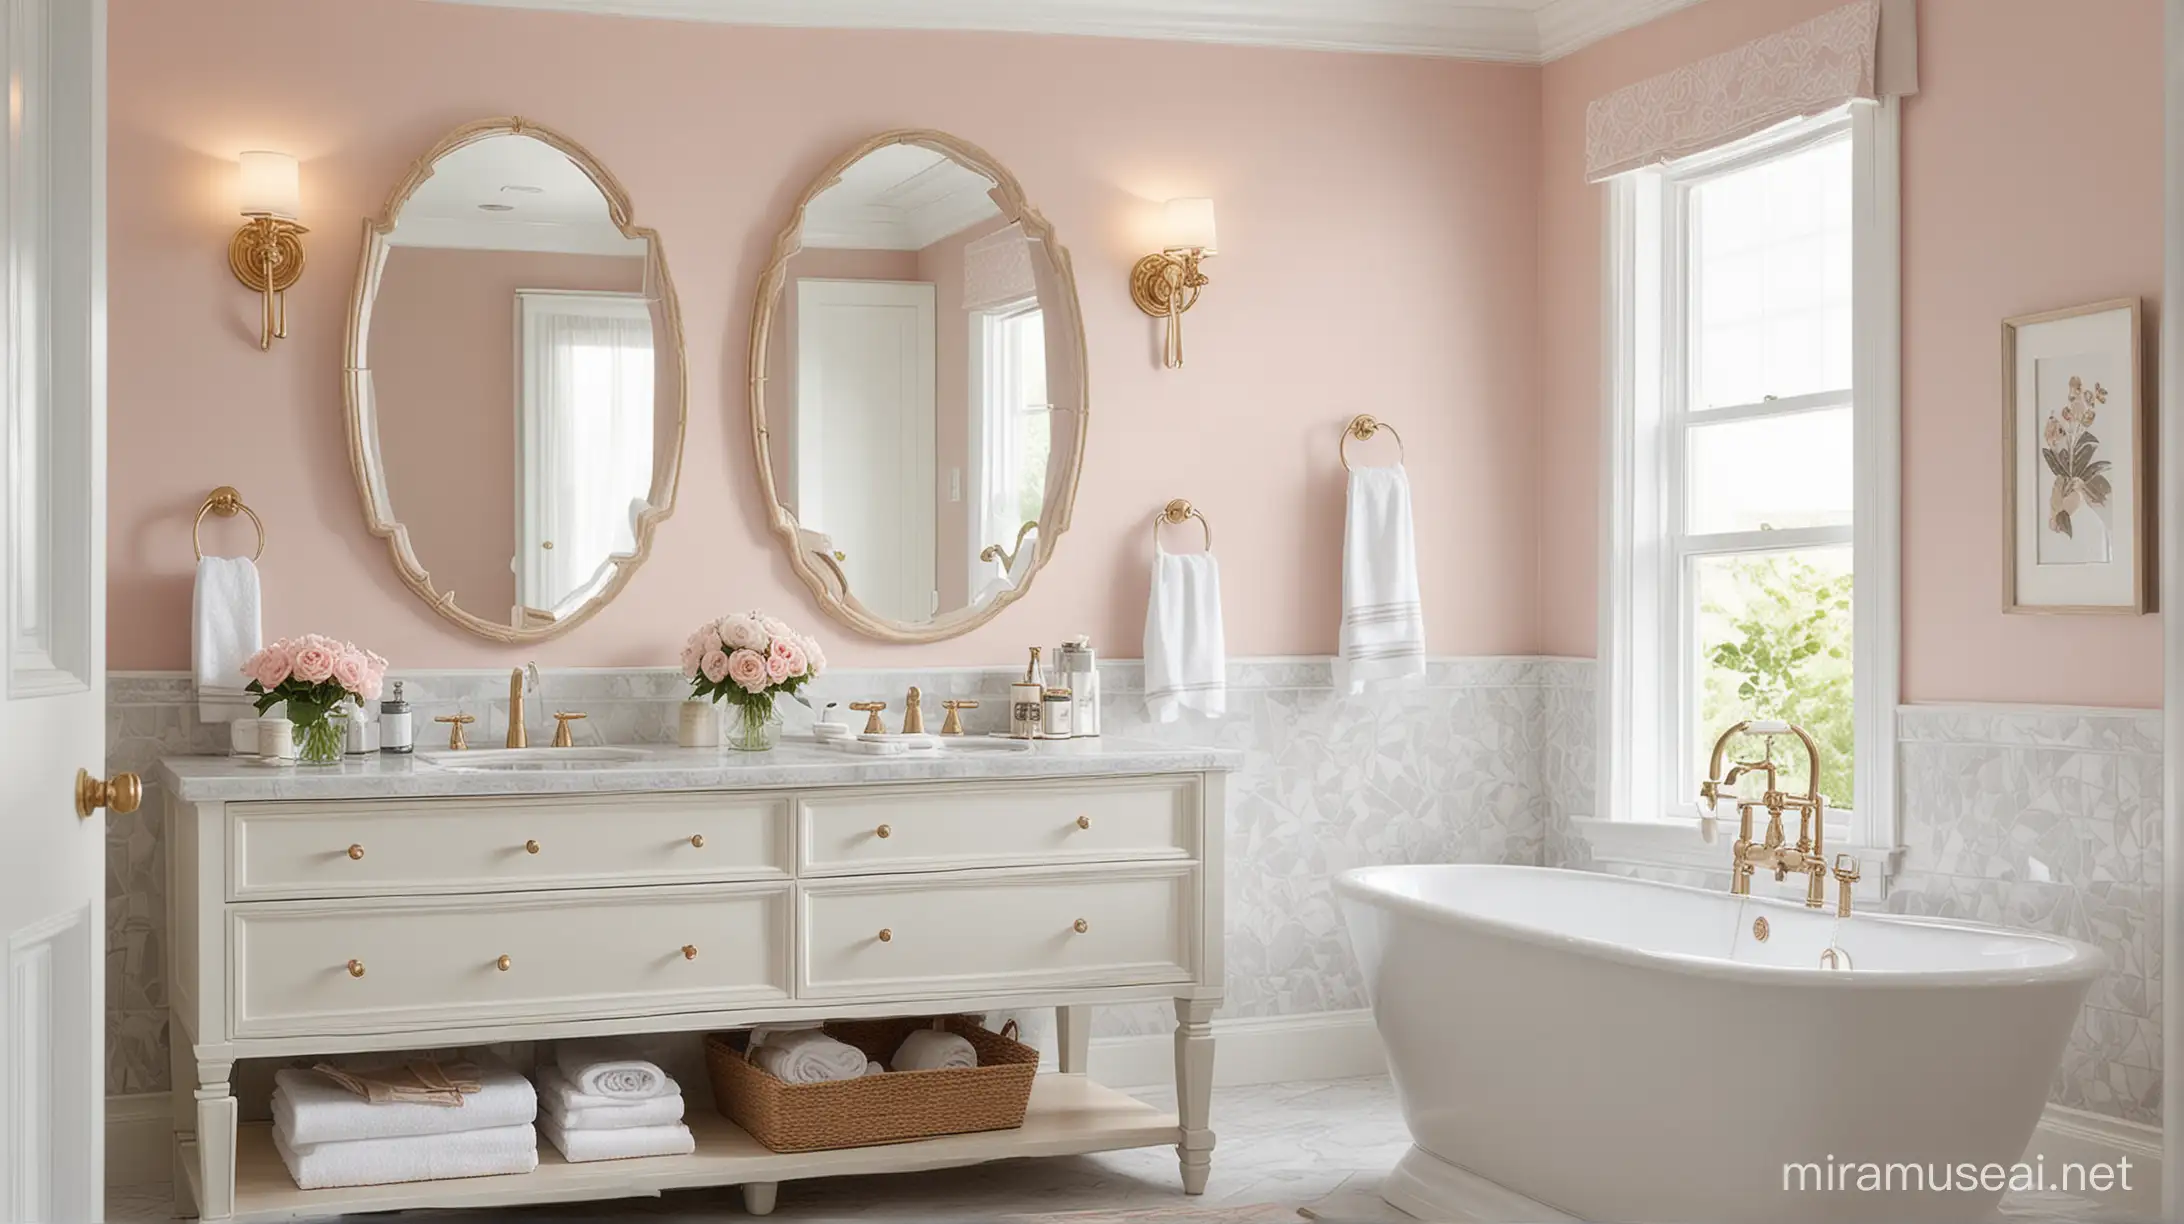 Feminine Aesthetic Bathroom with Soft Colors and Curved Shapes